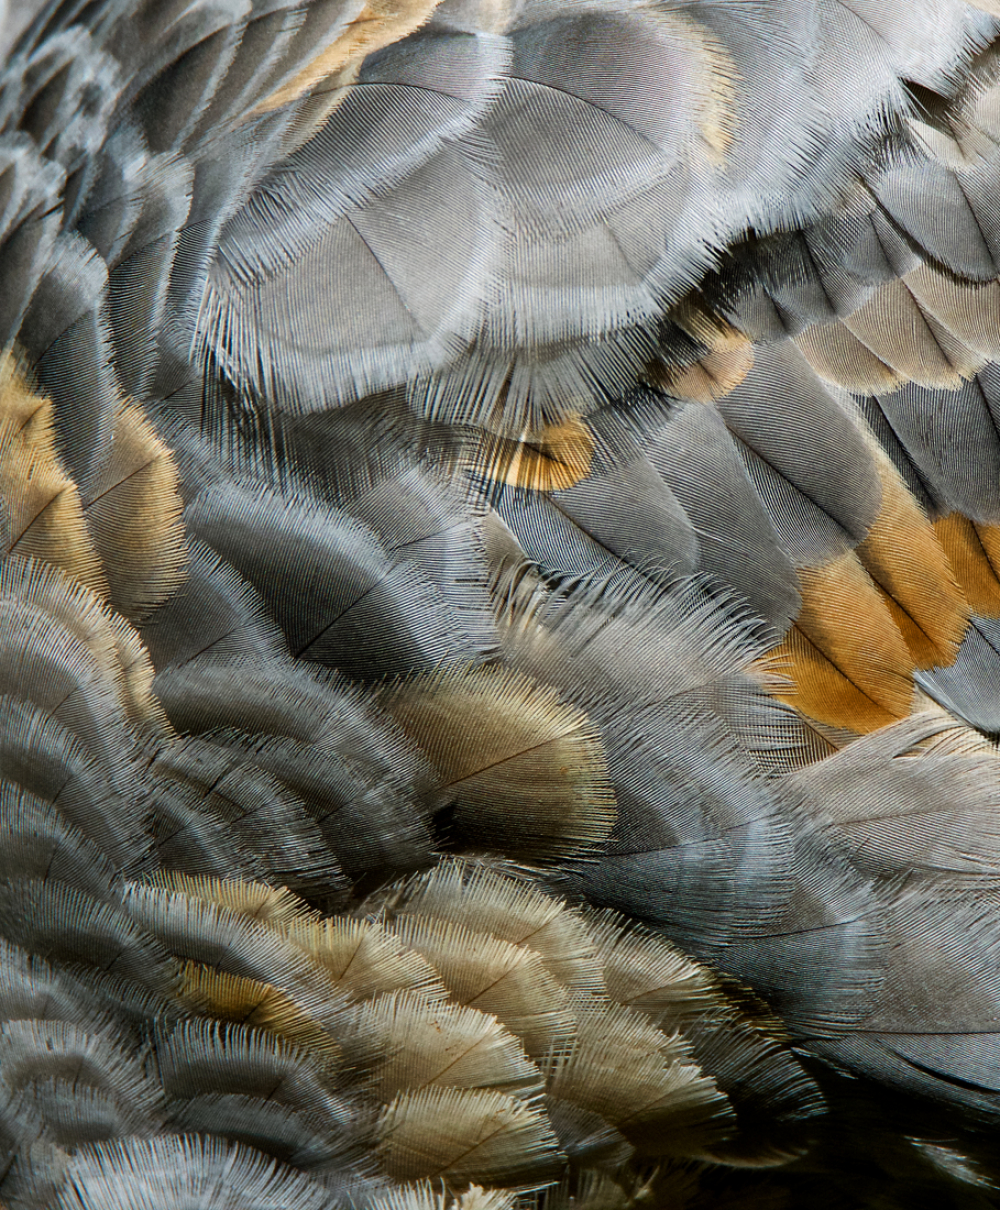 Crane feathers by michiganmike